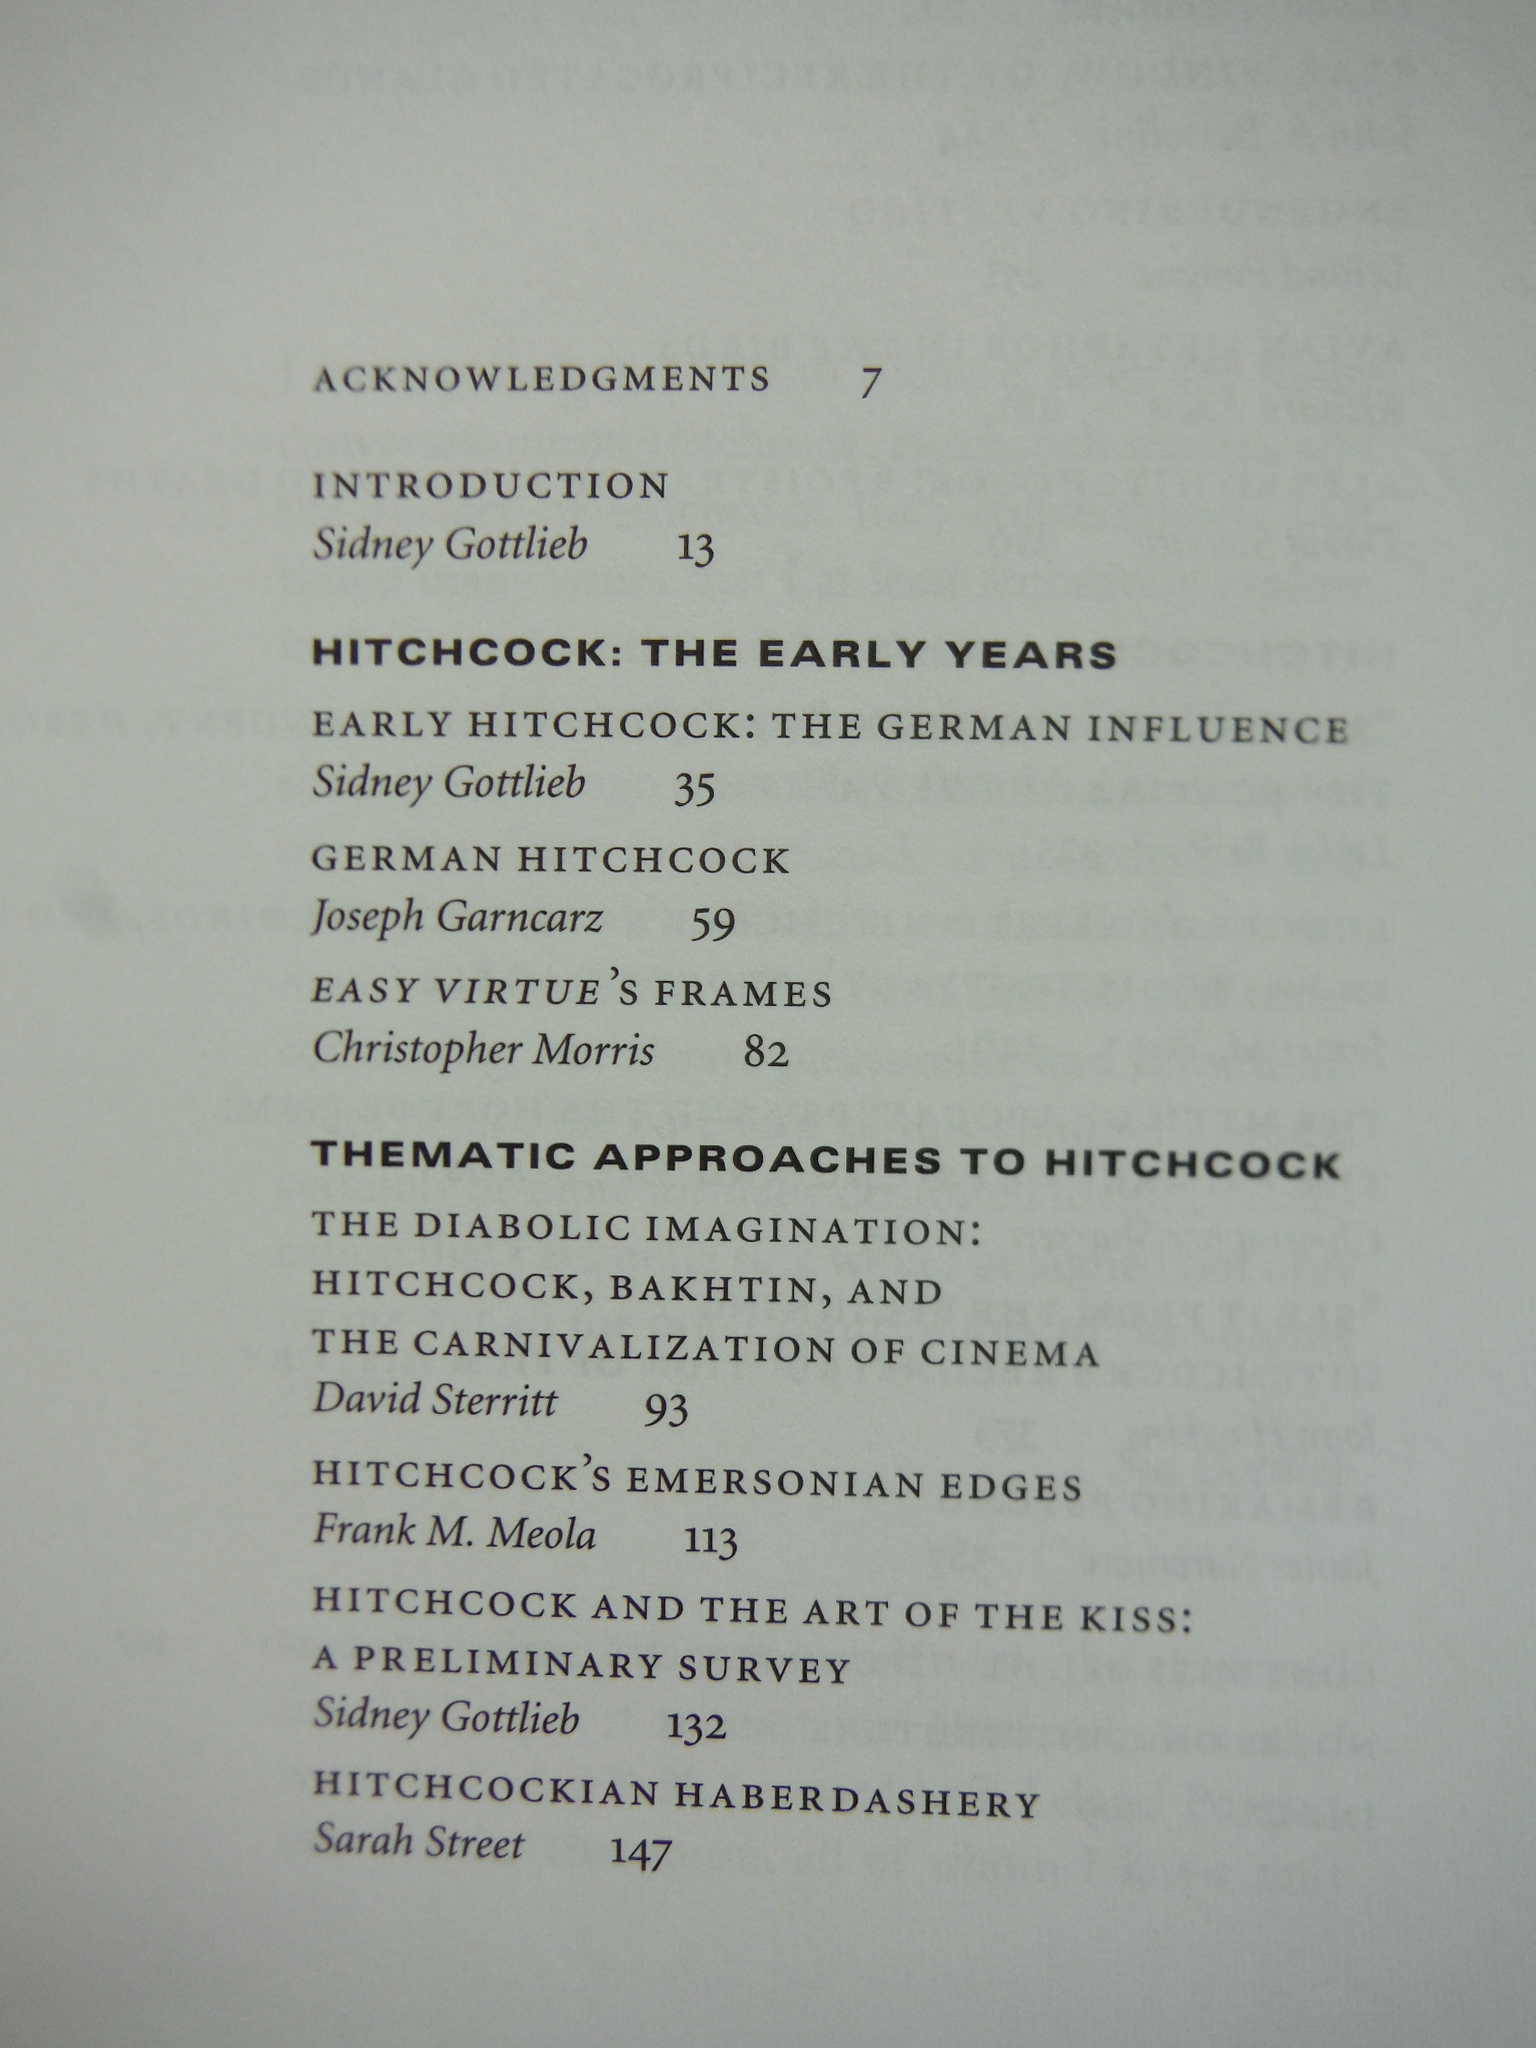 Image 2 of Framing Hitchcock: Selected Essays from the Hitchcock Annual (Contemporary Appro